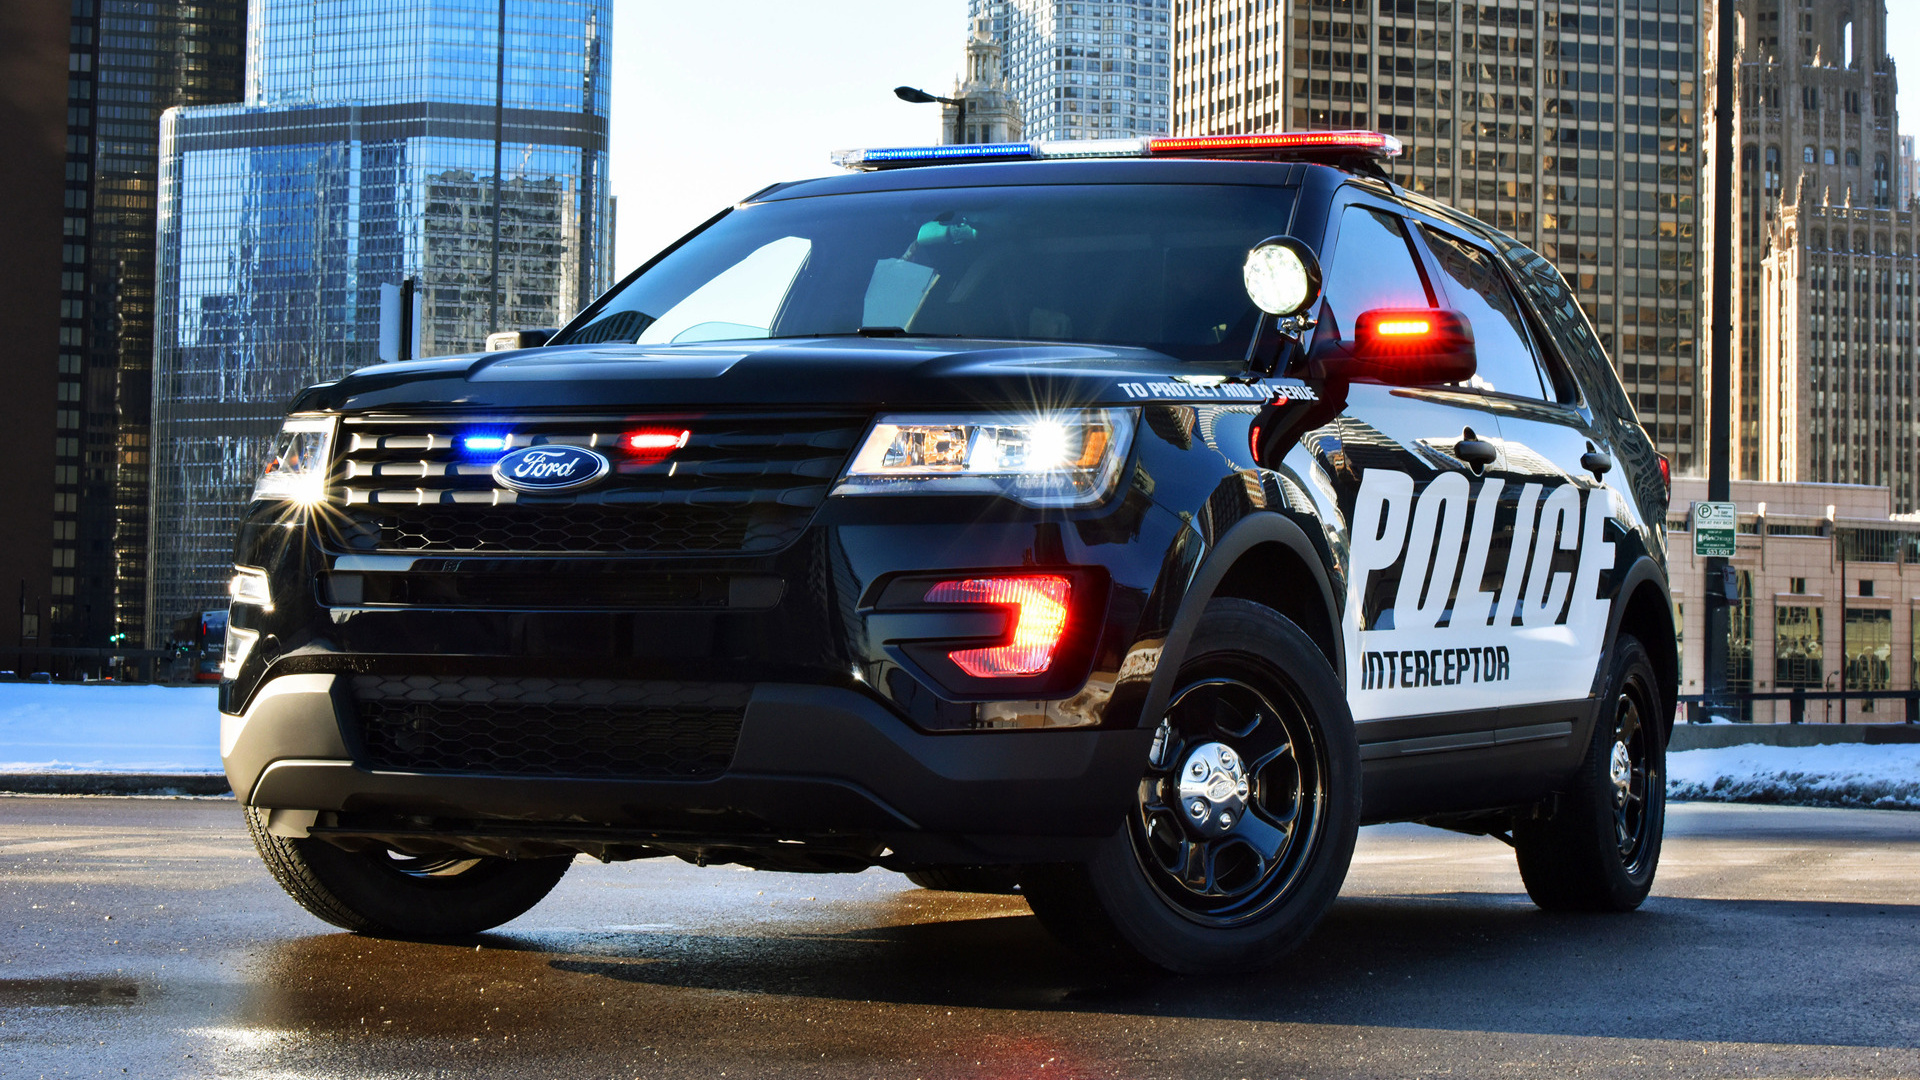 Ford Police Interceptor Utility Wallpaper And HD Image